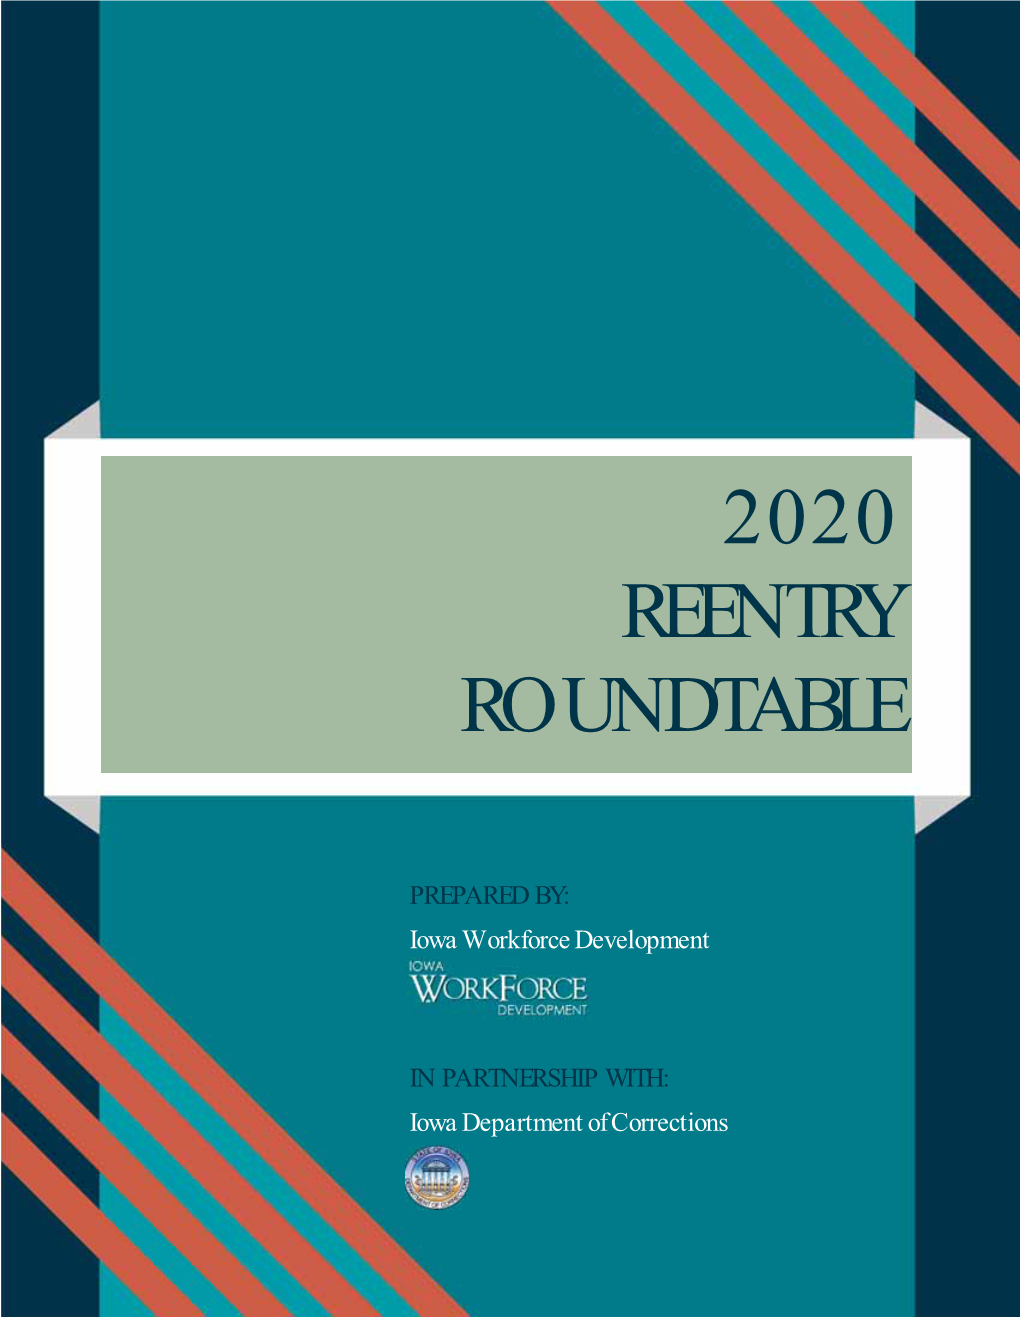 2020 Reentry Roundtable